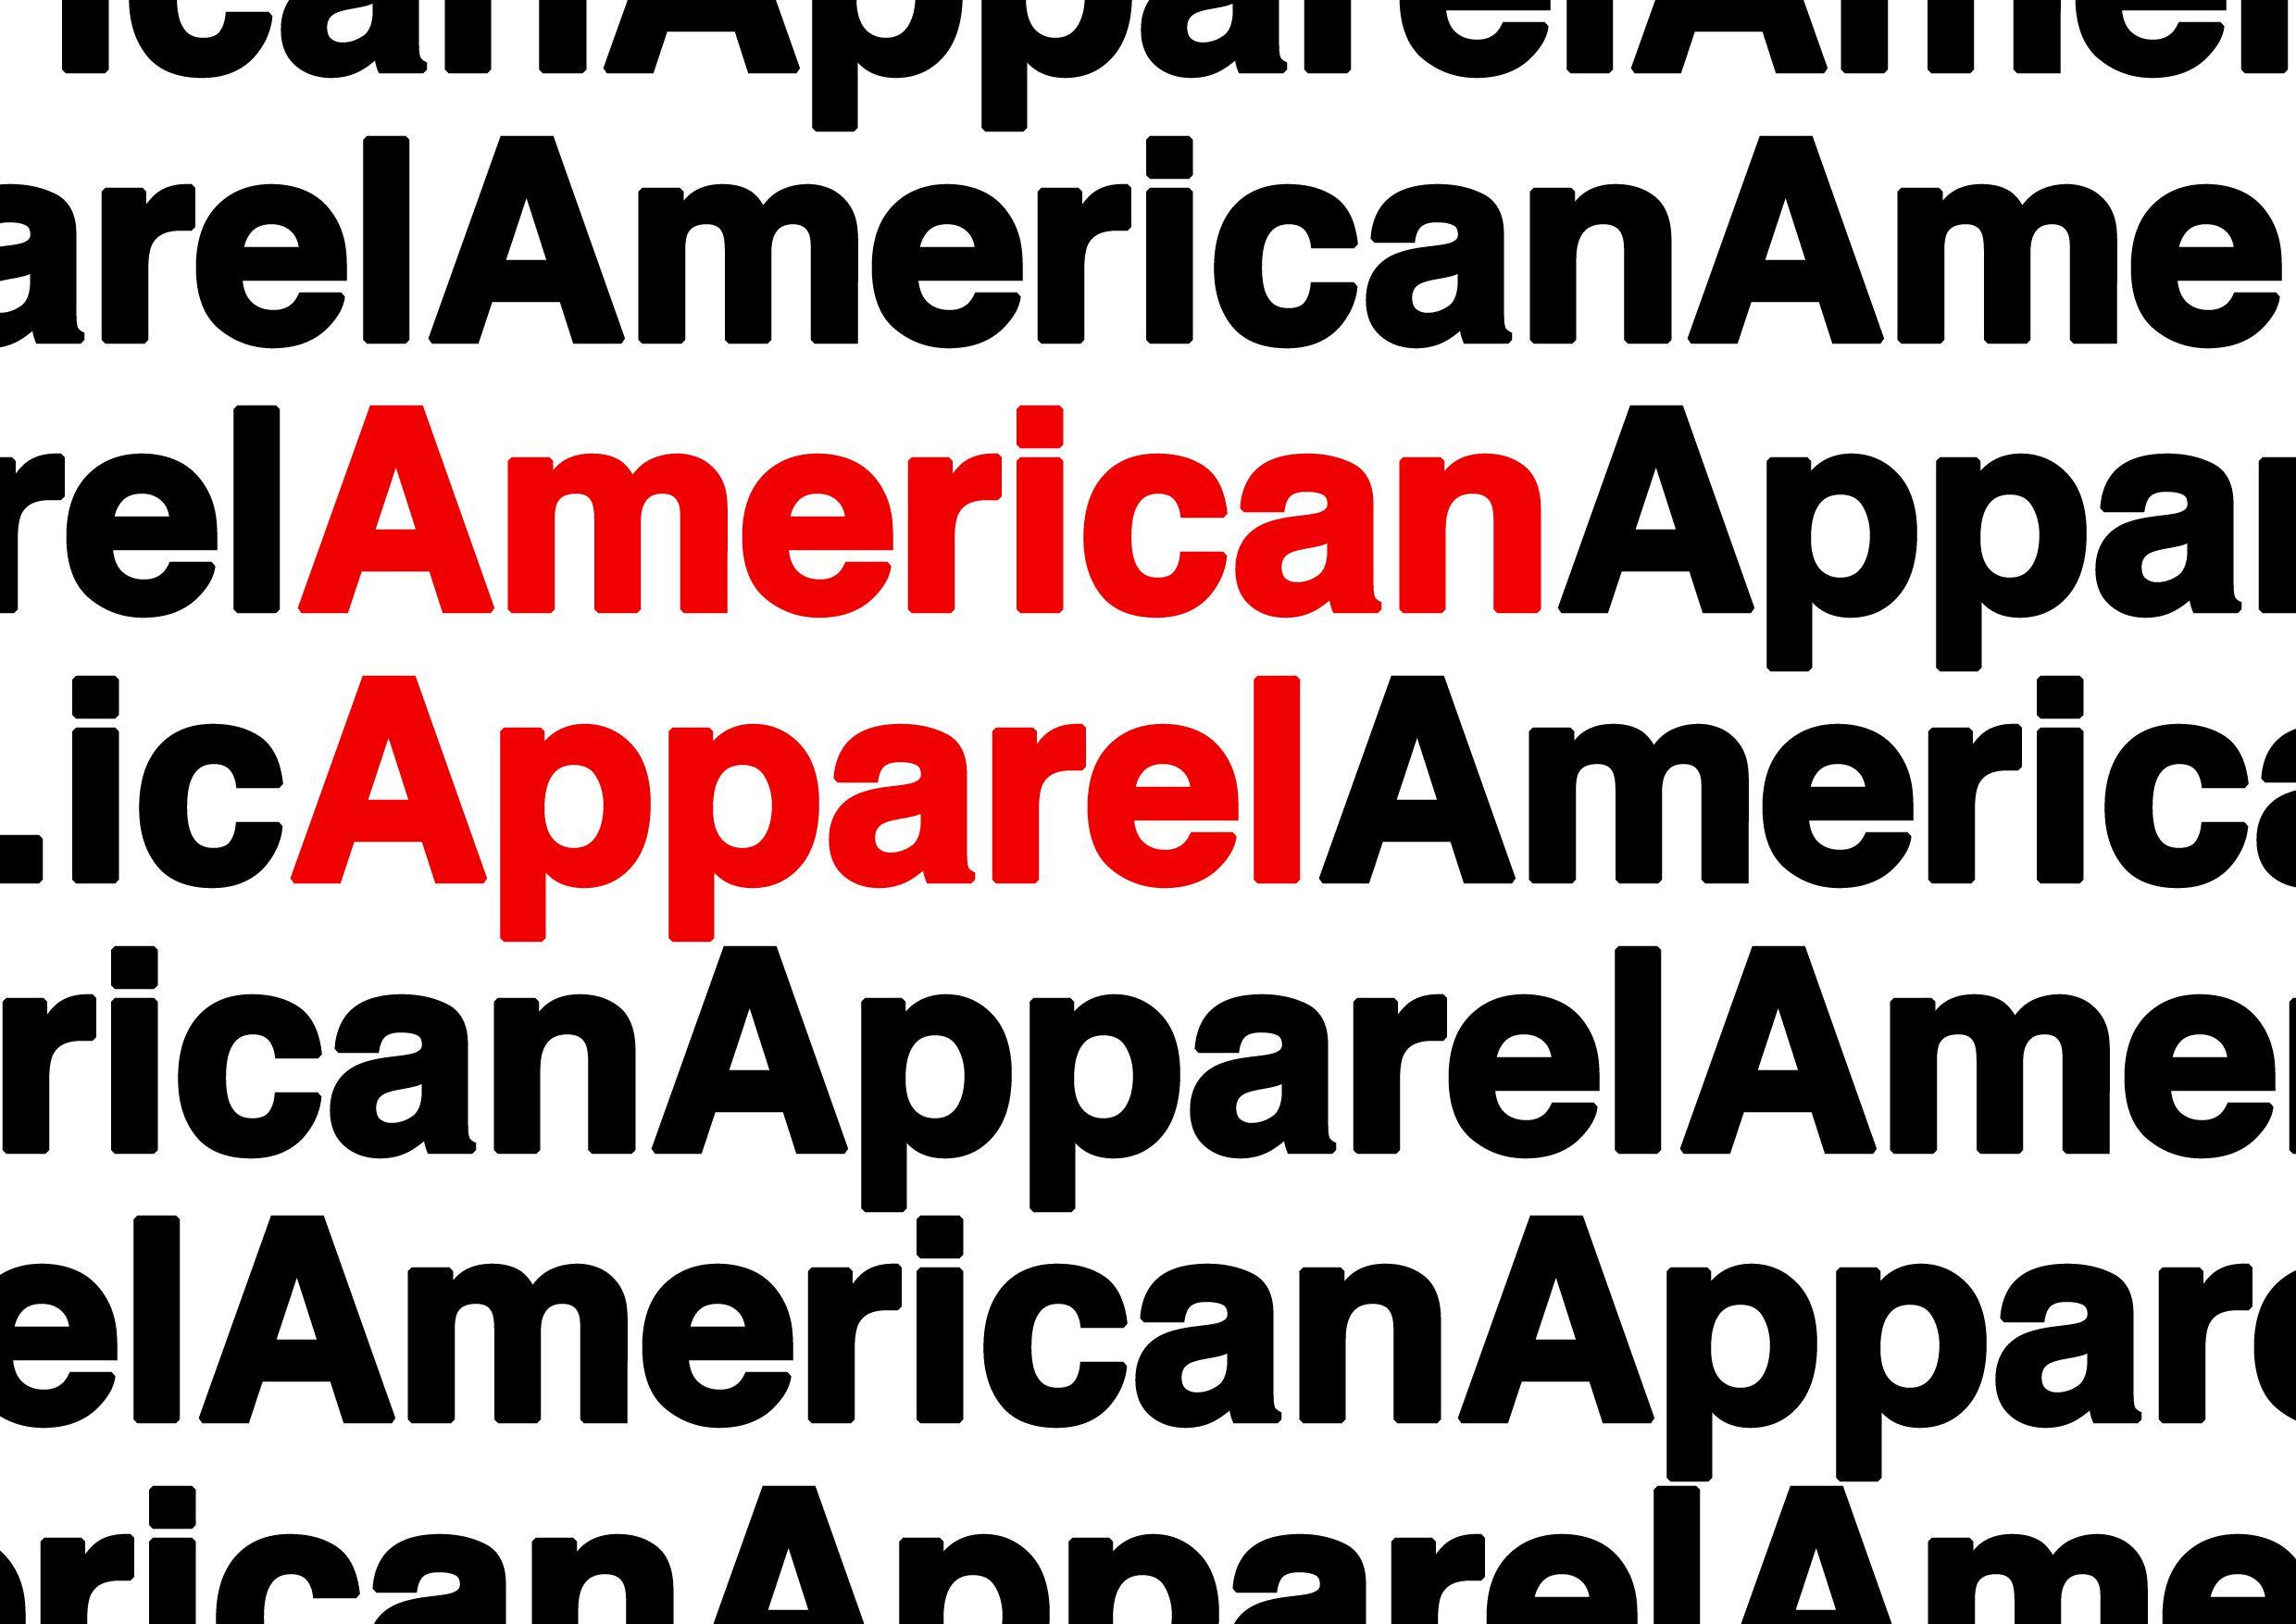 American Apparel Logo - Buy american apparel logo - 64% OFF! Share discount